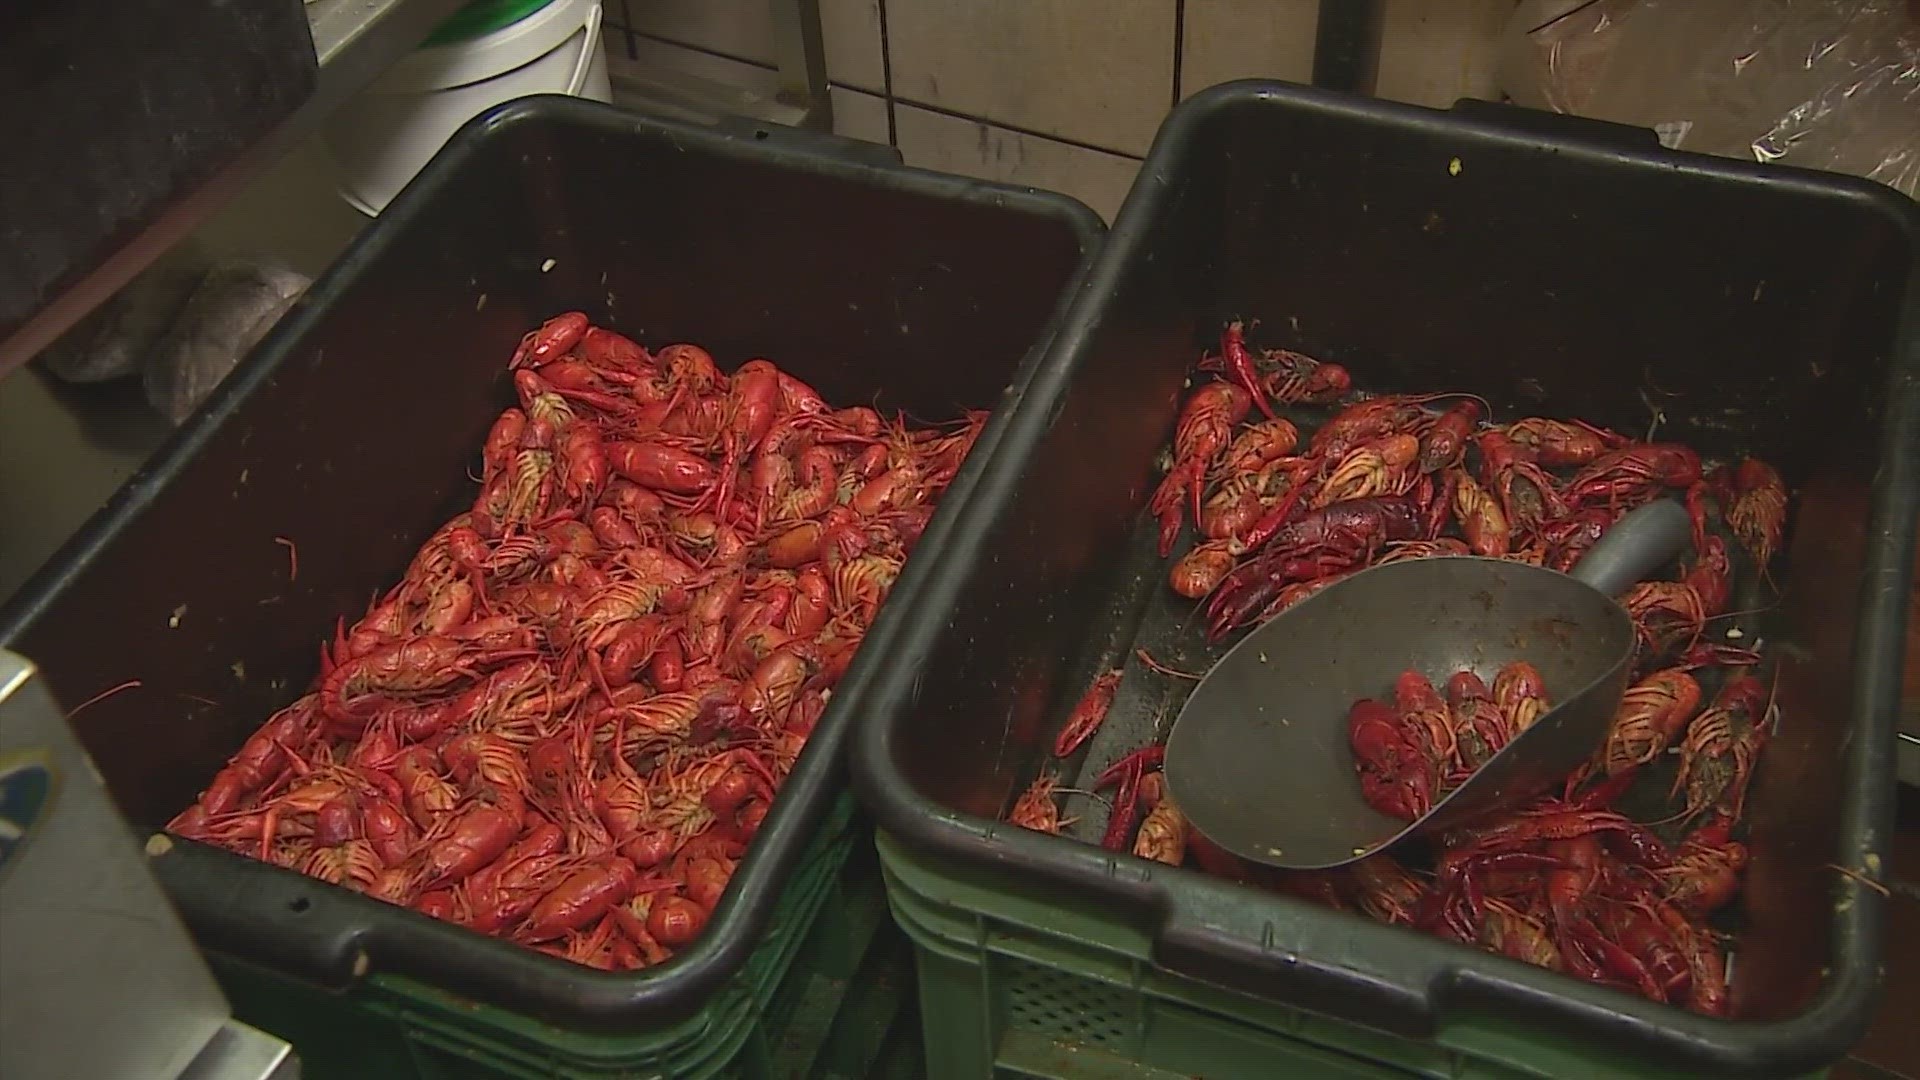 It's crawfish season but you'll have to shell out more cash for those juicy little mudbugs this year!